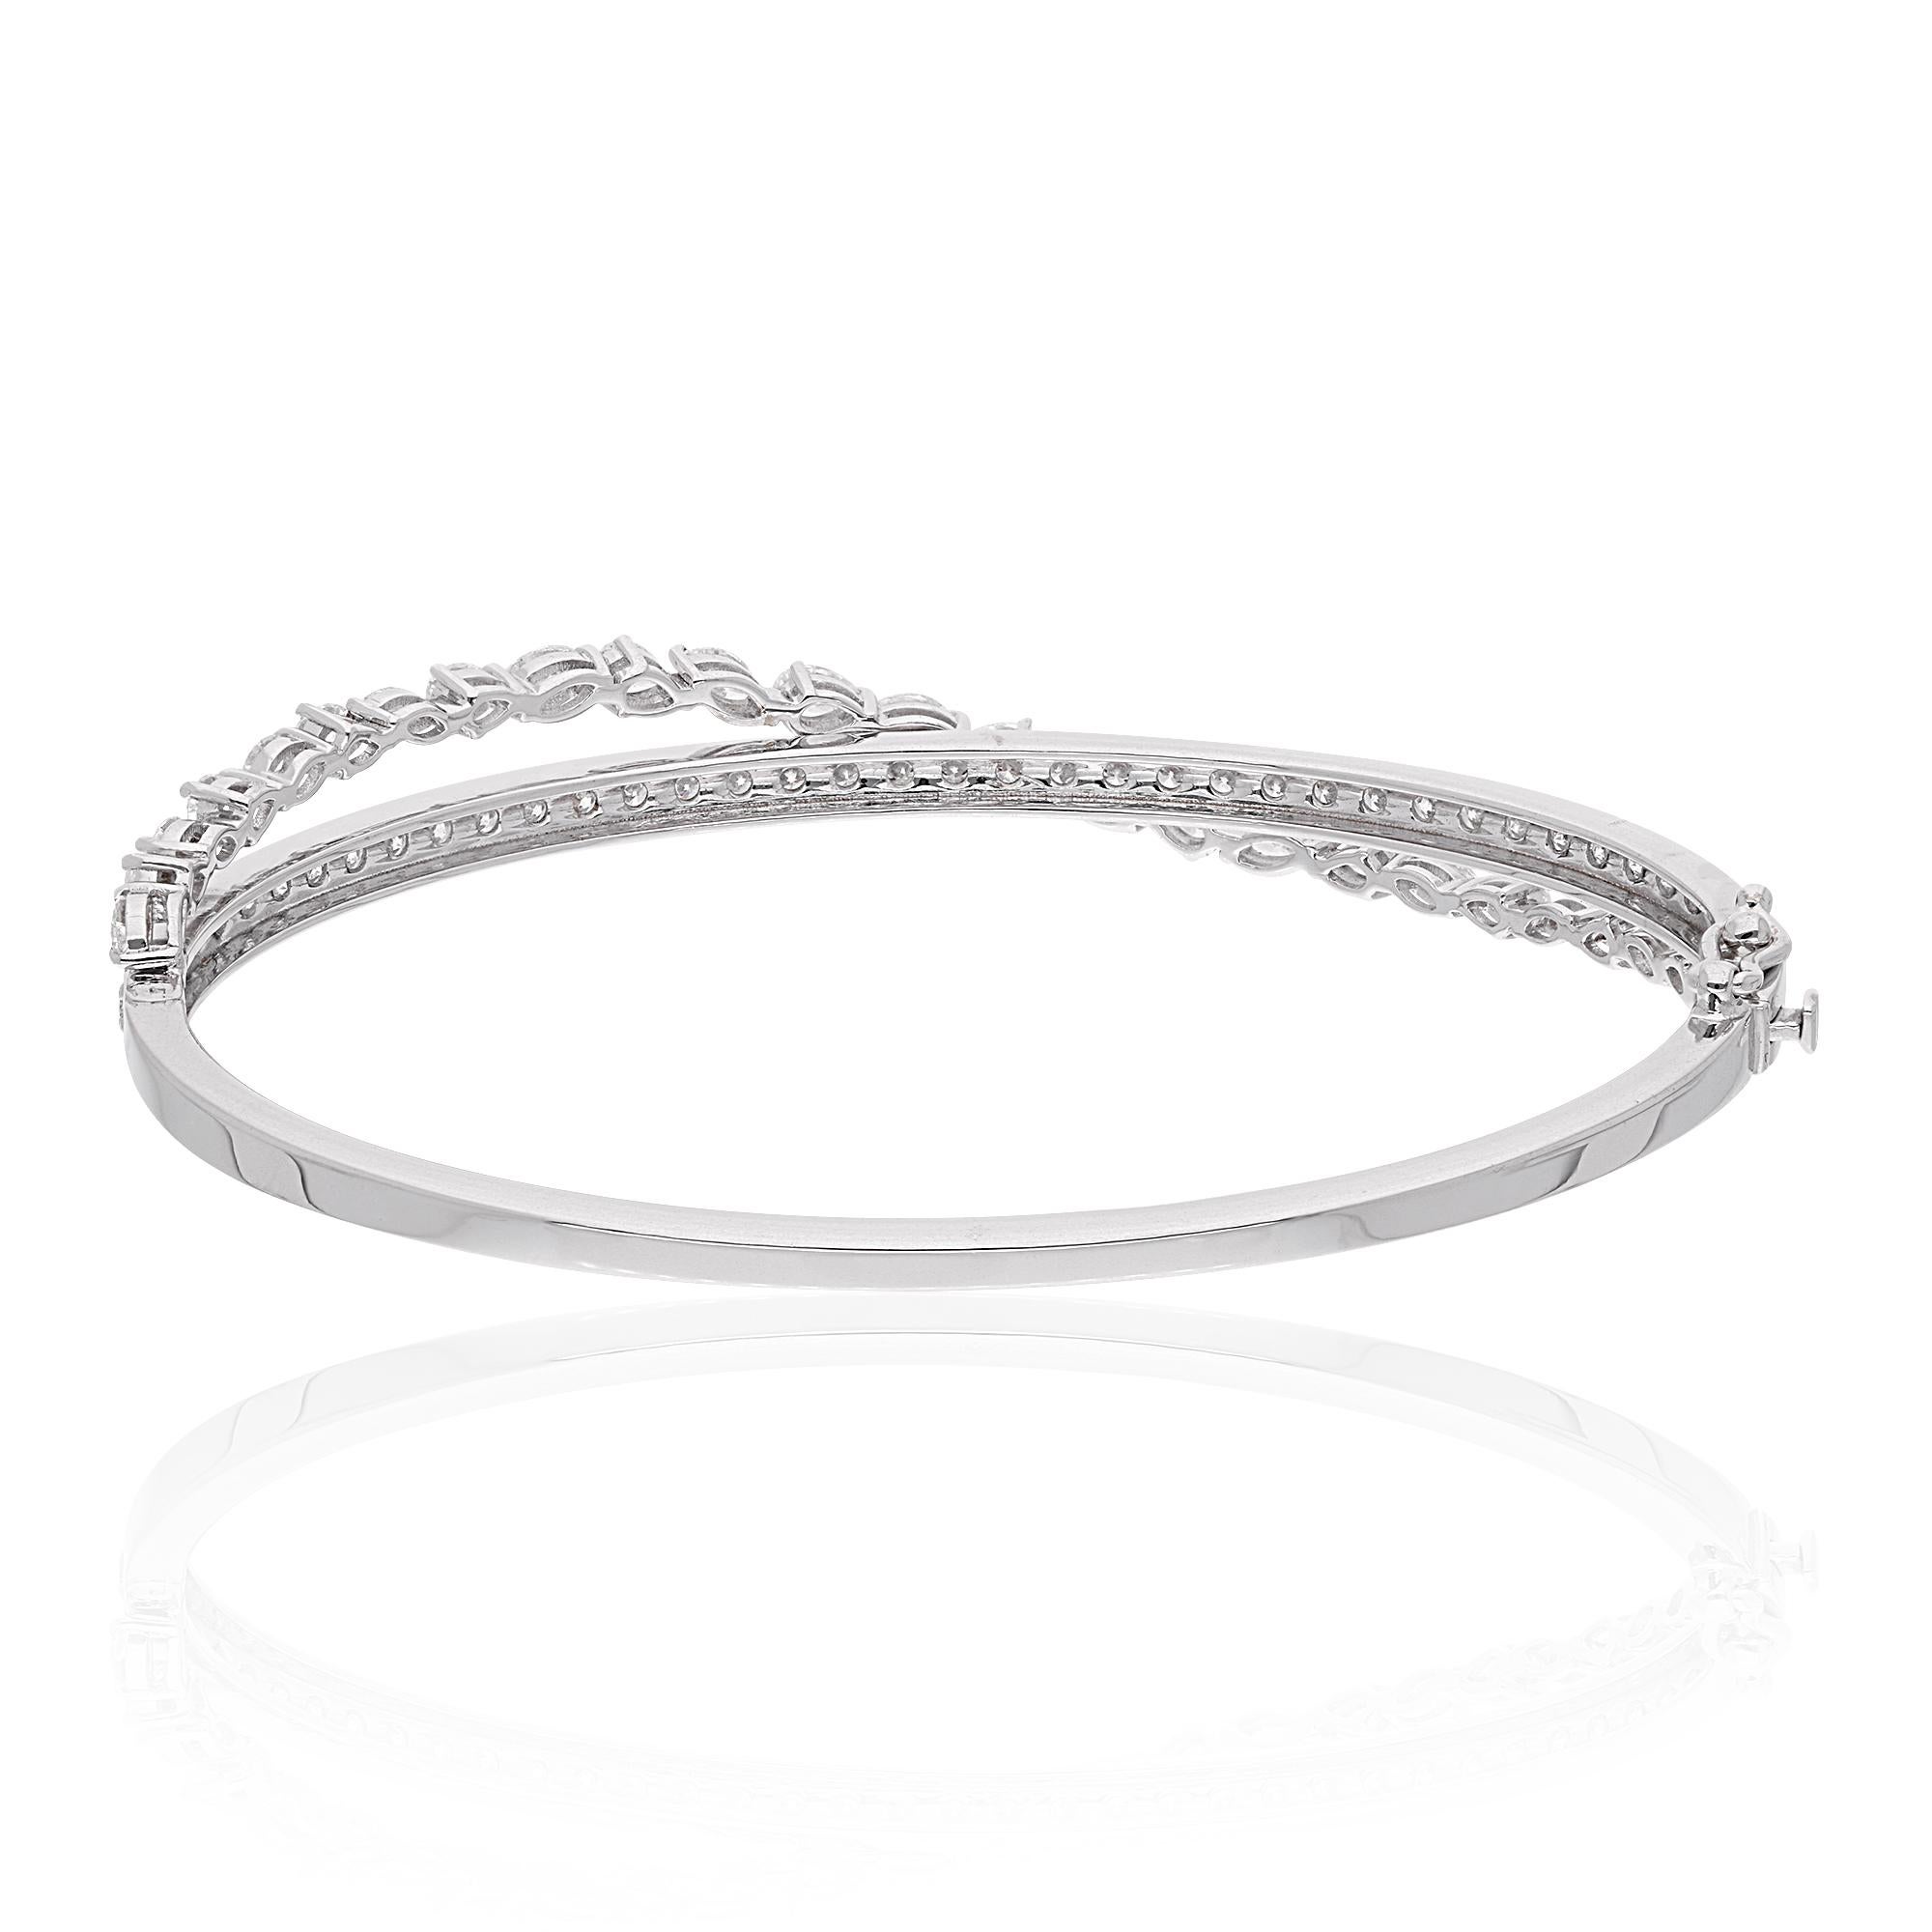 2.65 Ct. Diamond Bangle Bracelet, Genuine Diamond Bangle Bracelet, 18k White Gold Diamond Bracelet, Minimalist Bangle Fine Diamond Jewelry

This dainty diamond bracelet is a promise of perfection and purity. Gift this little piece of happiness to